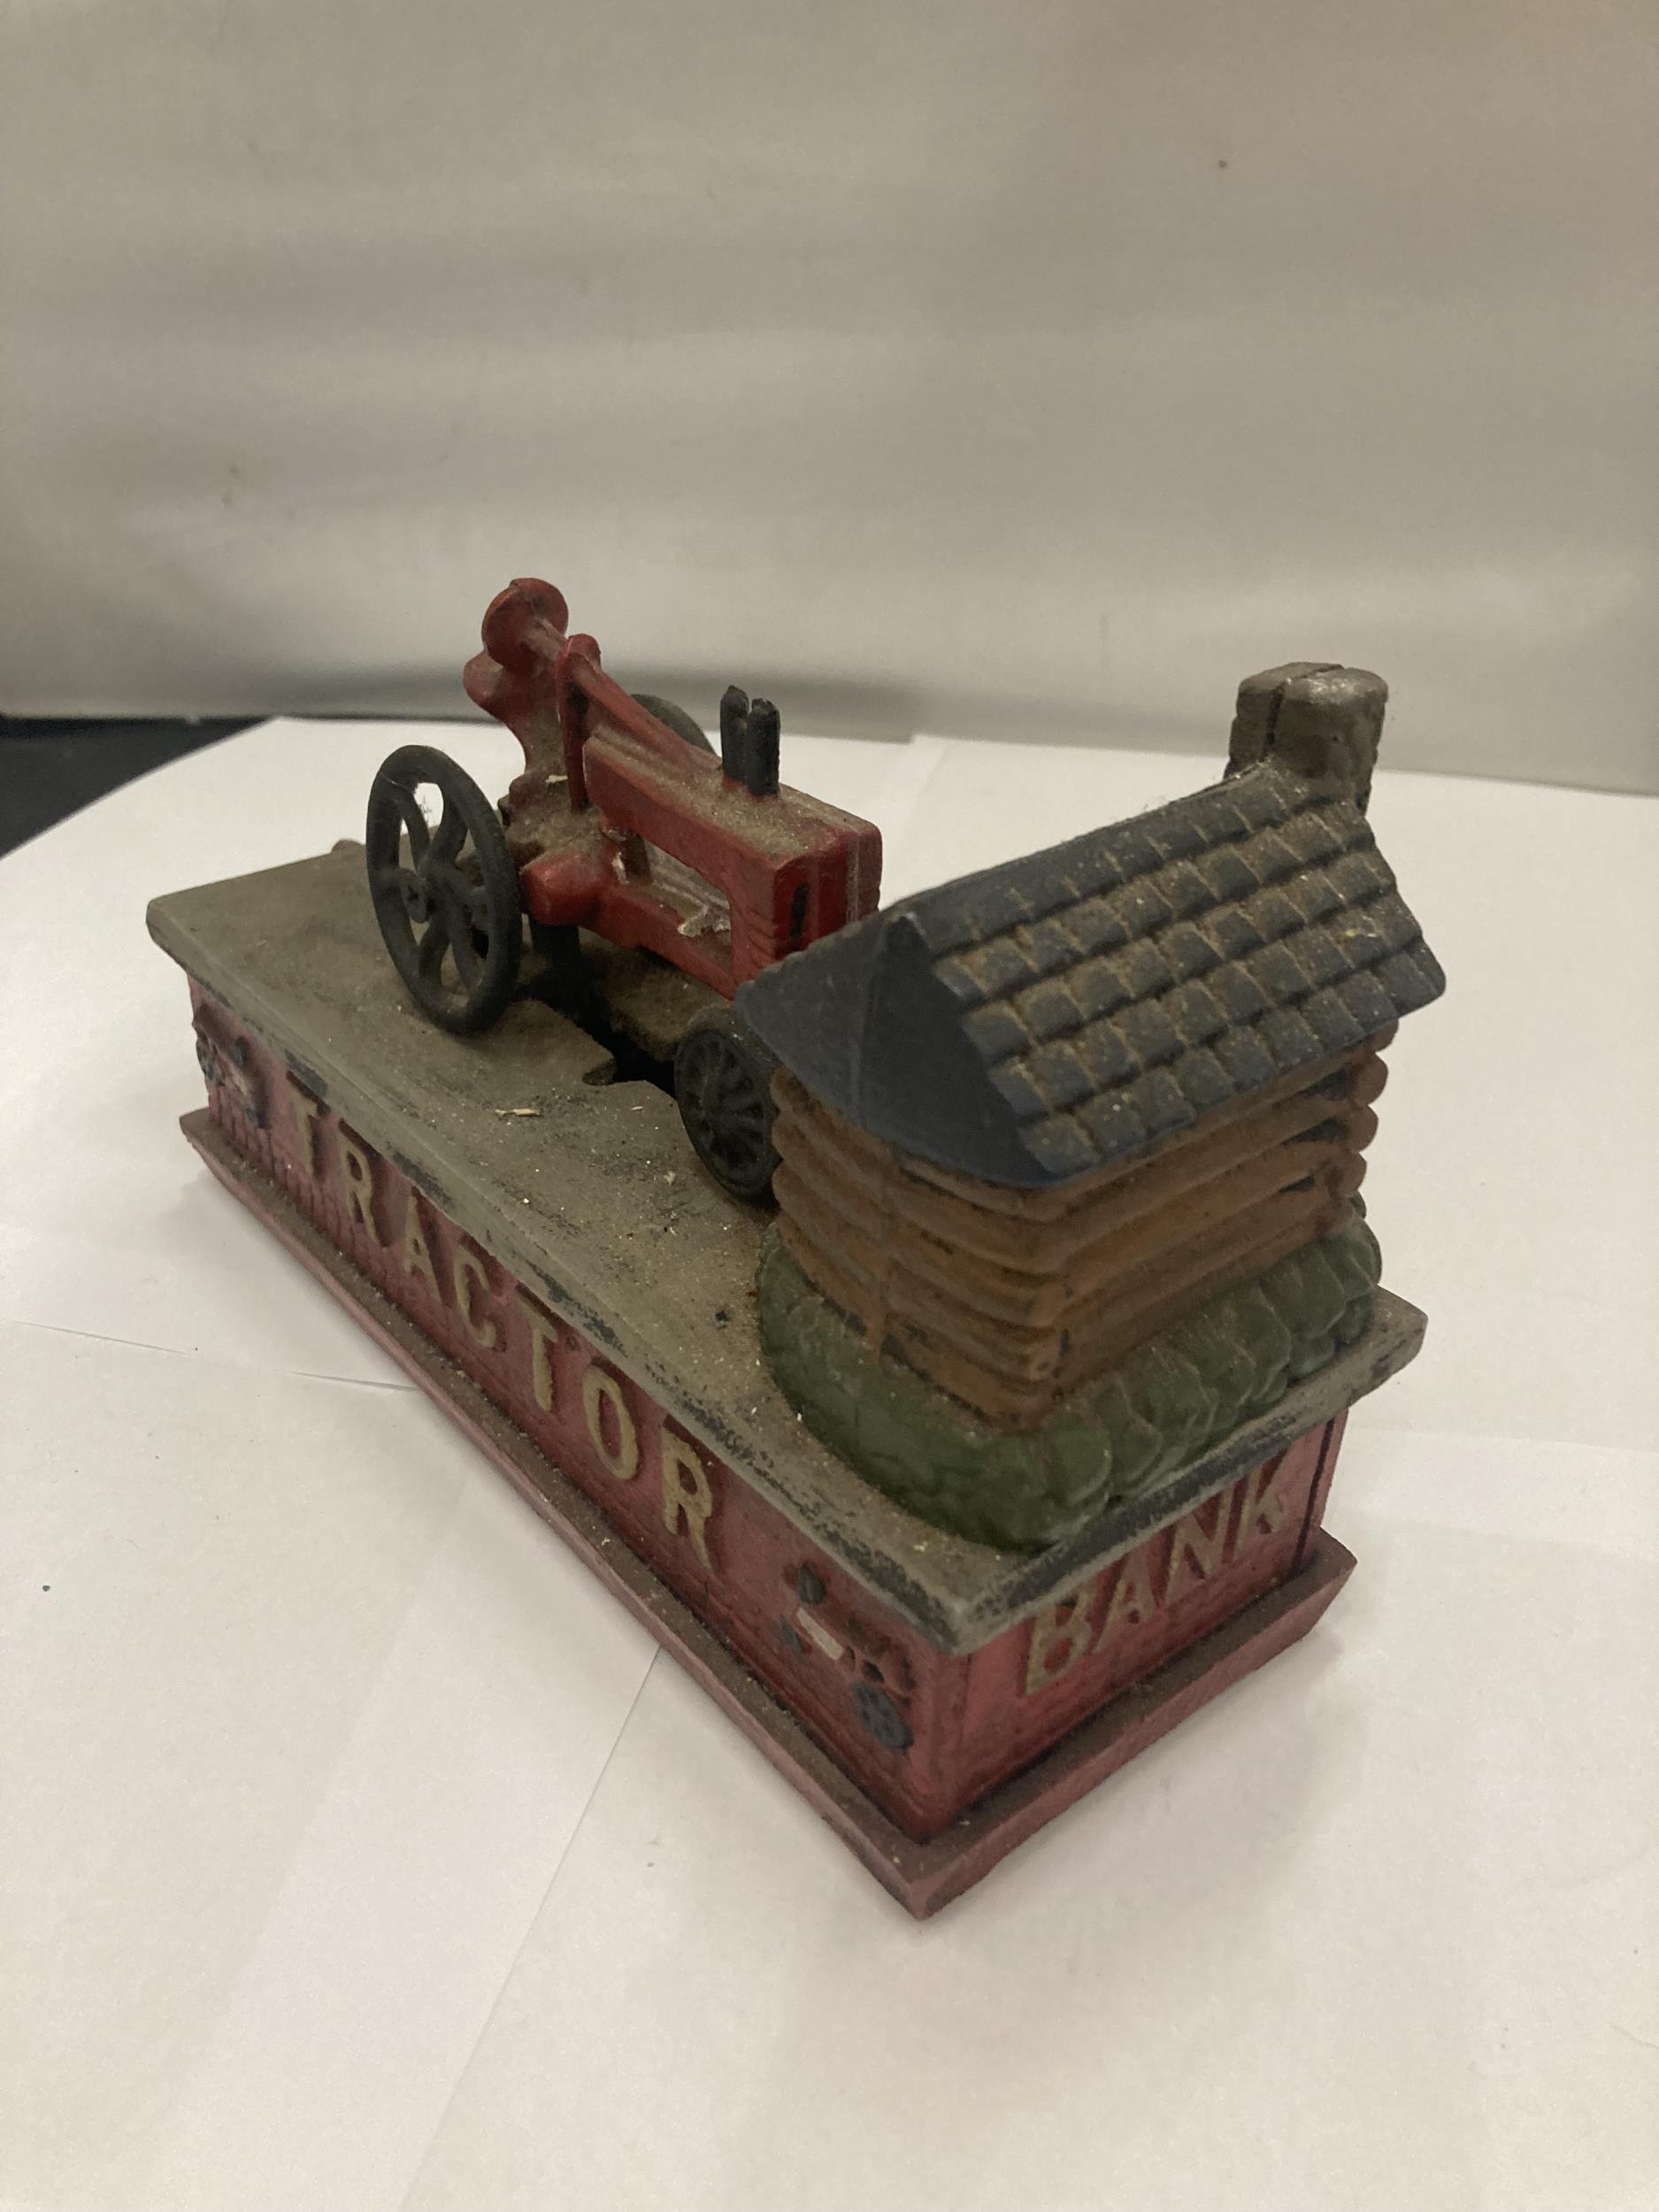 A VINTAGE STYLE CAST TRACTOR MONEY BANK - Image 3 of 3